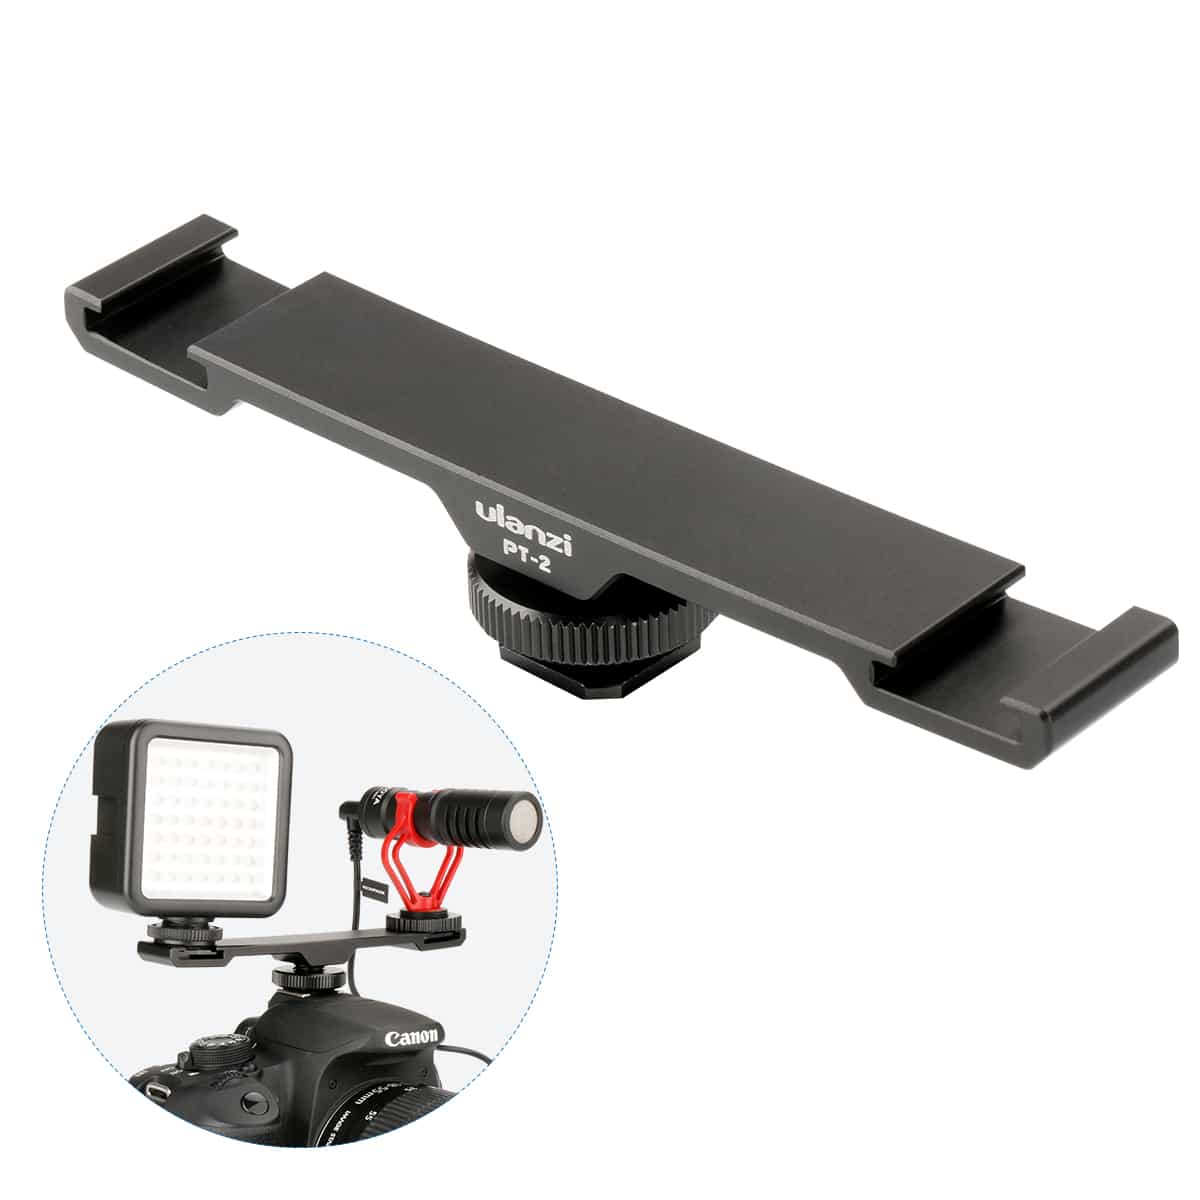 Ulanzi PT-2 Dual Cold Shoe Mount for camera and phone holder